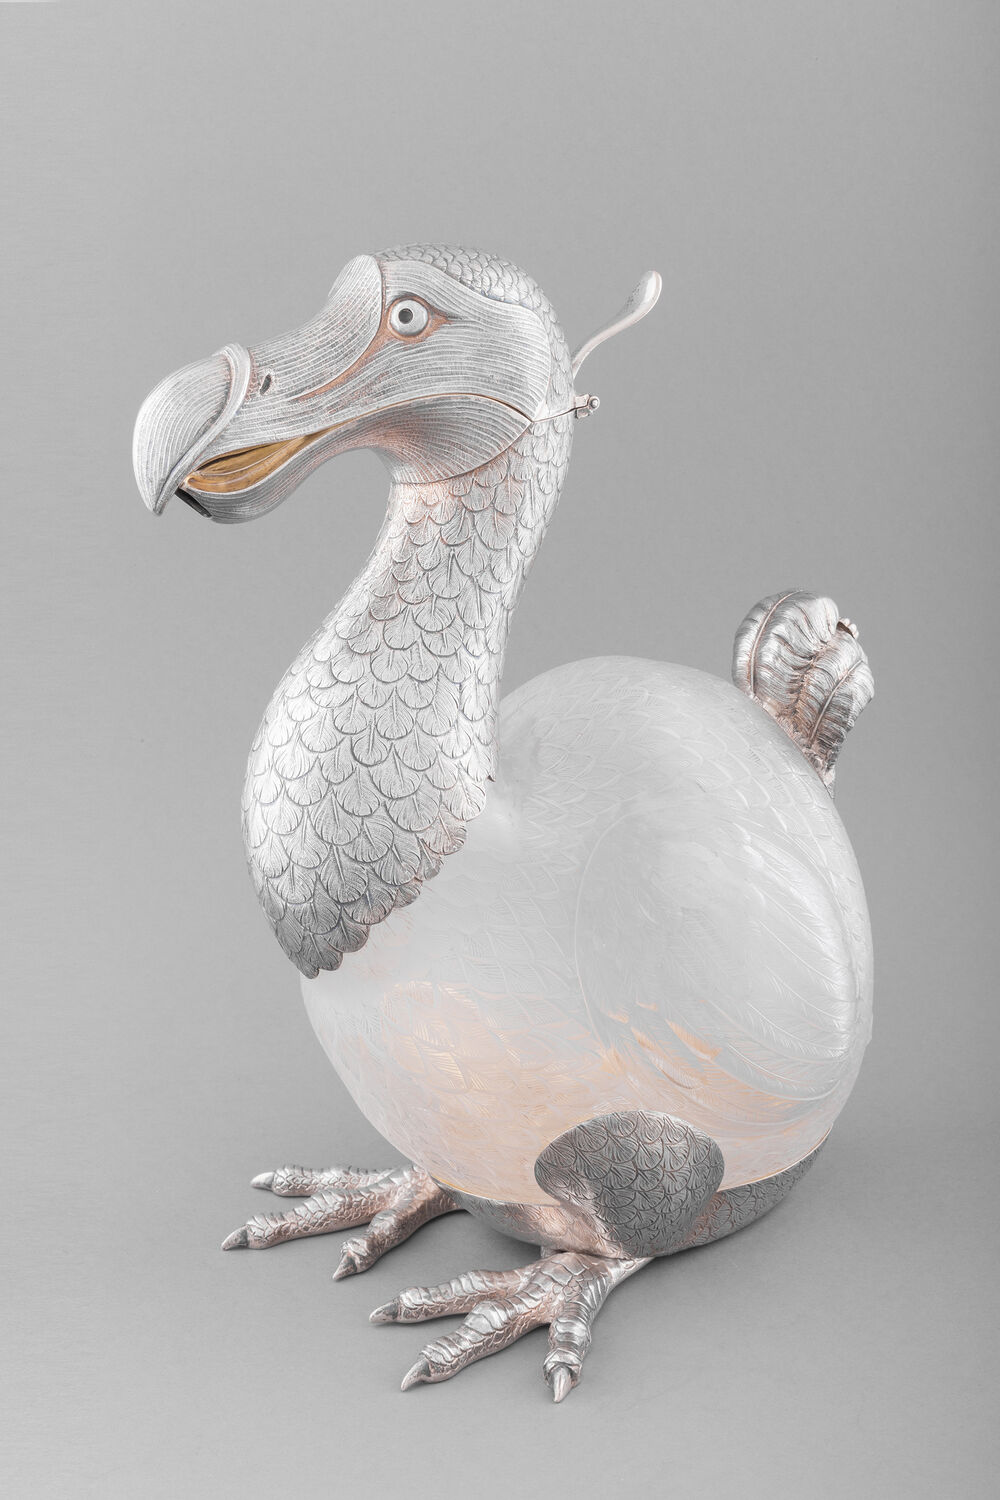 A silver wine jug, shaped like a dodo. The hinged beak opens to pour the wine through.